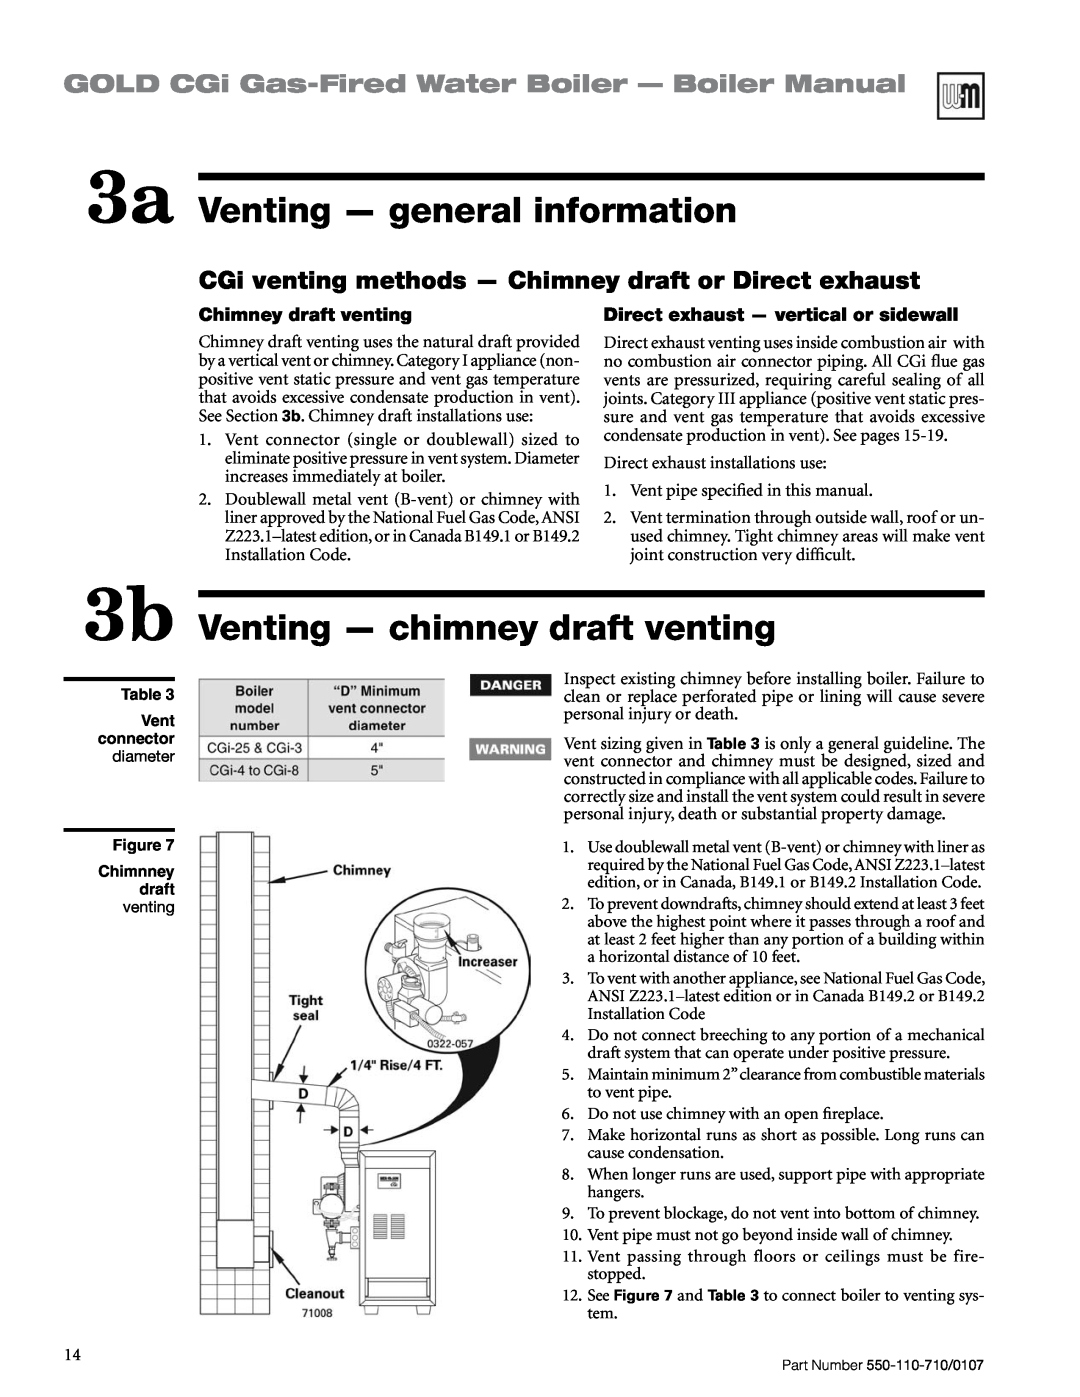 Weil-McLain Series 2 manual 3a Venting — general information, Venting — chimney draft venting, Chimney draft venting 